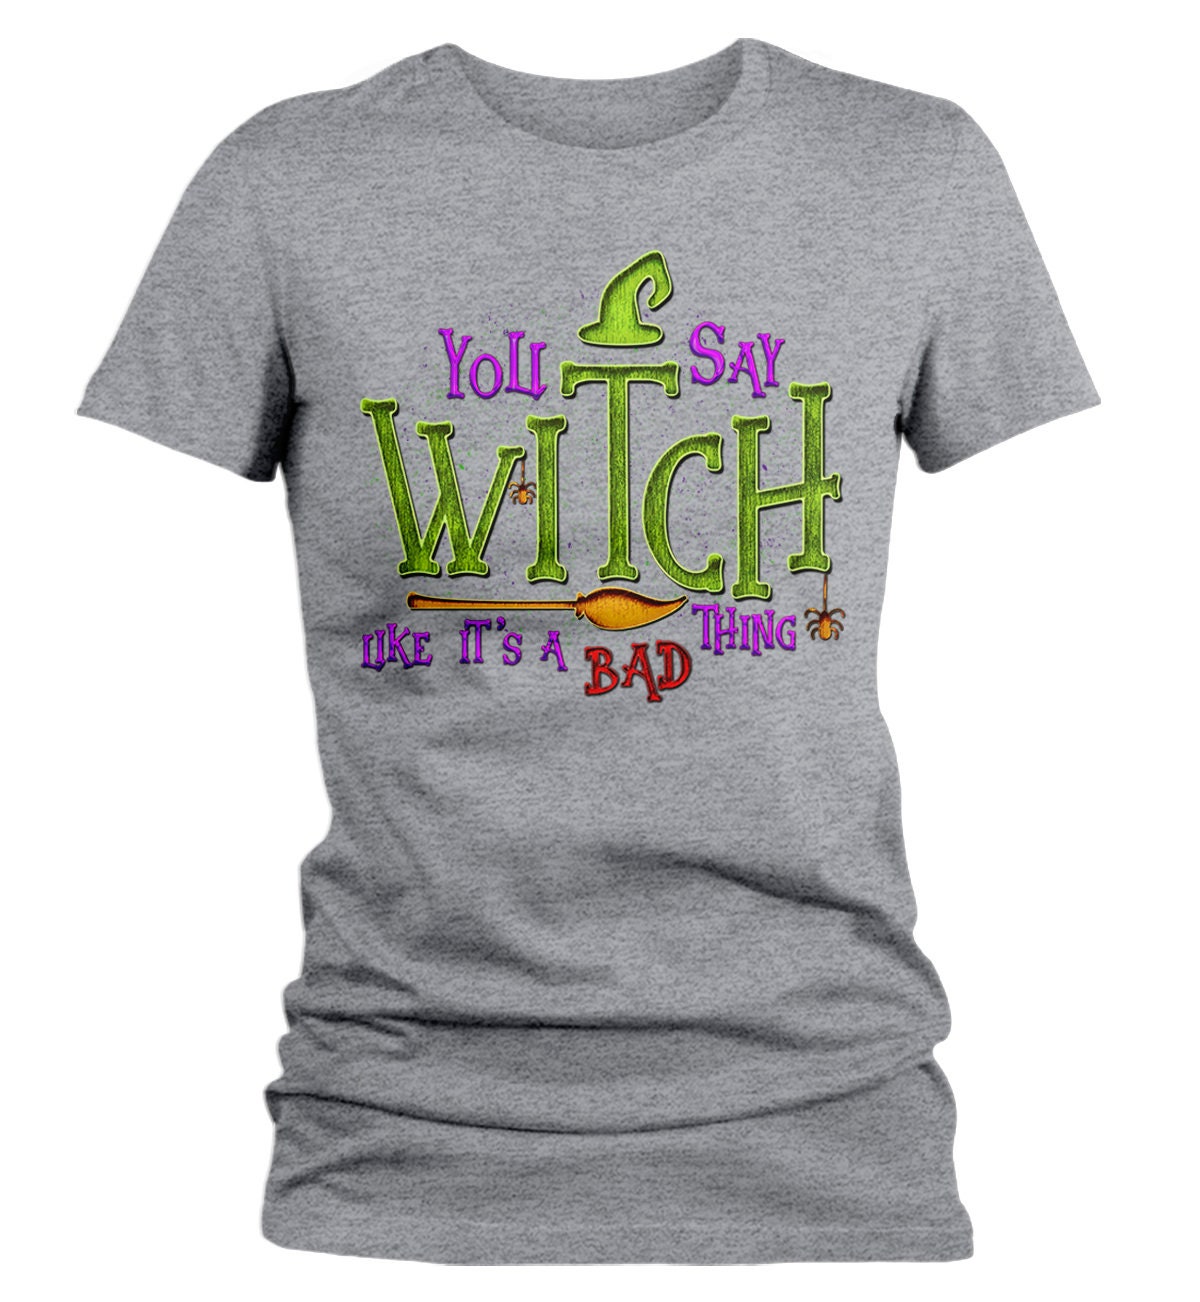 Women's Funny Halloween T Shirt You Say Witch Bad Thing | Etsy